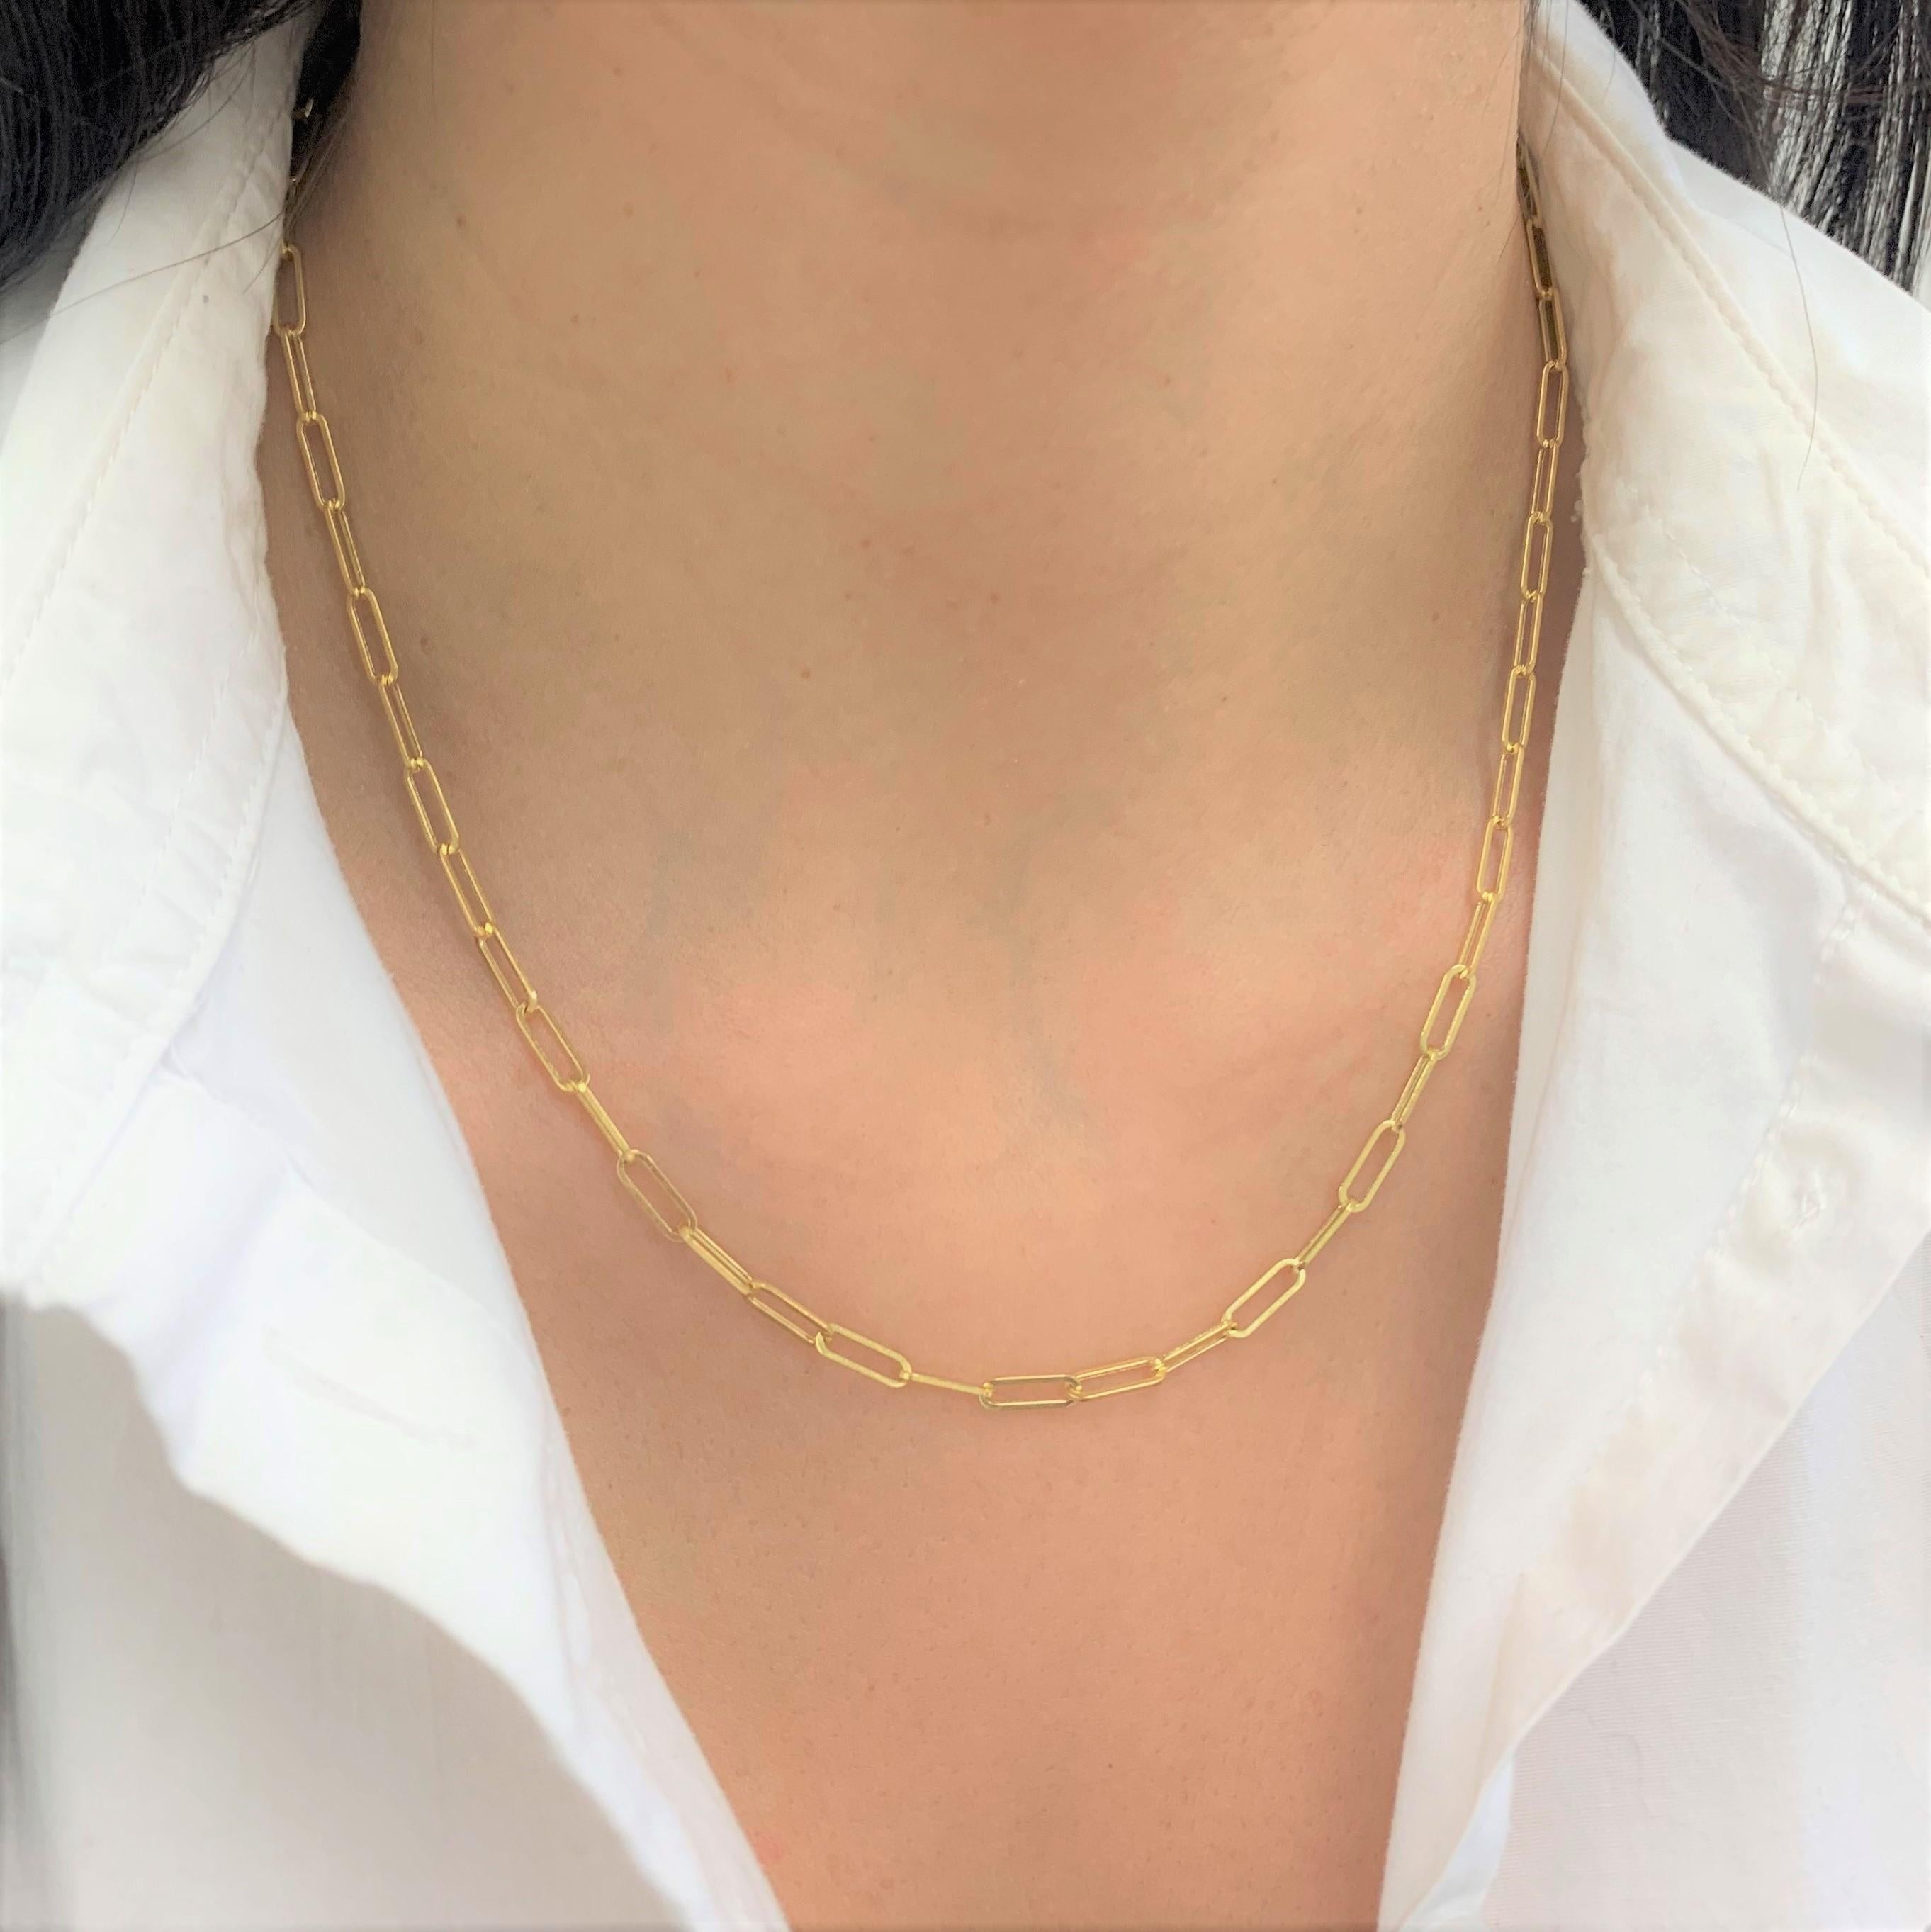 20 inch paperclip necklace